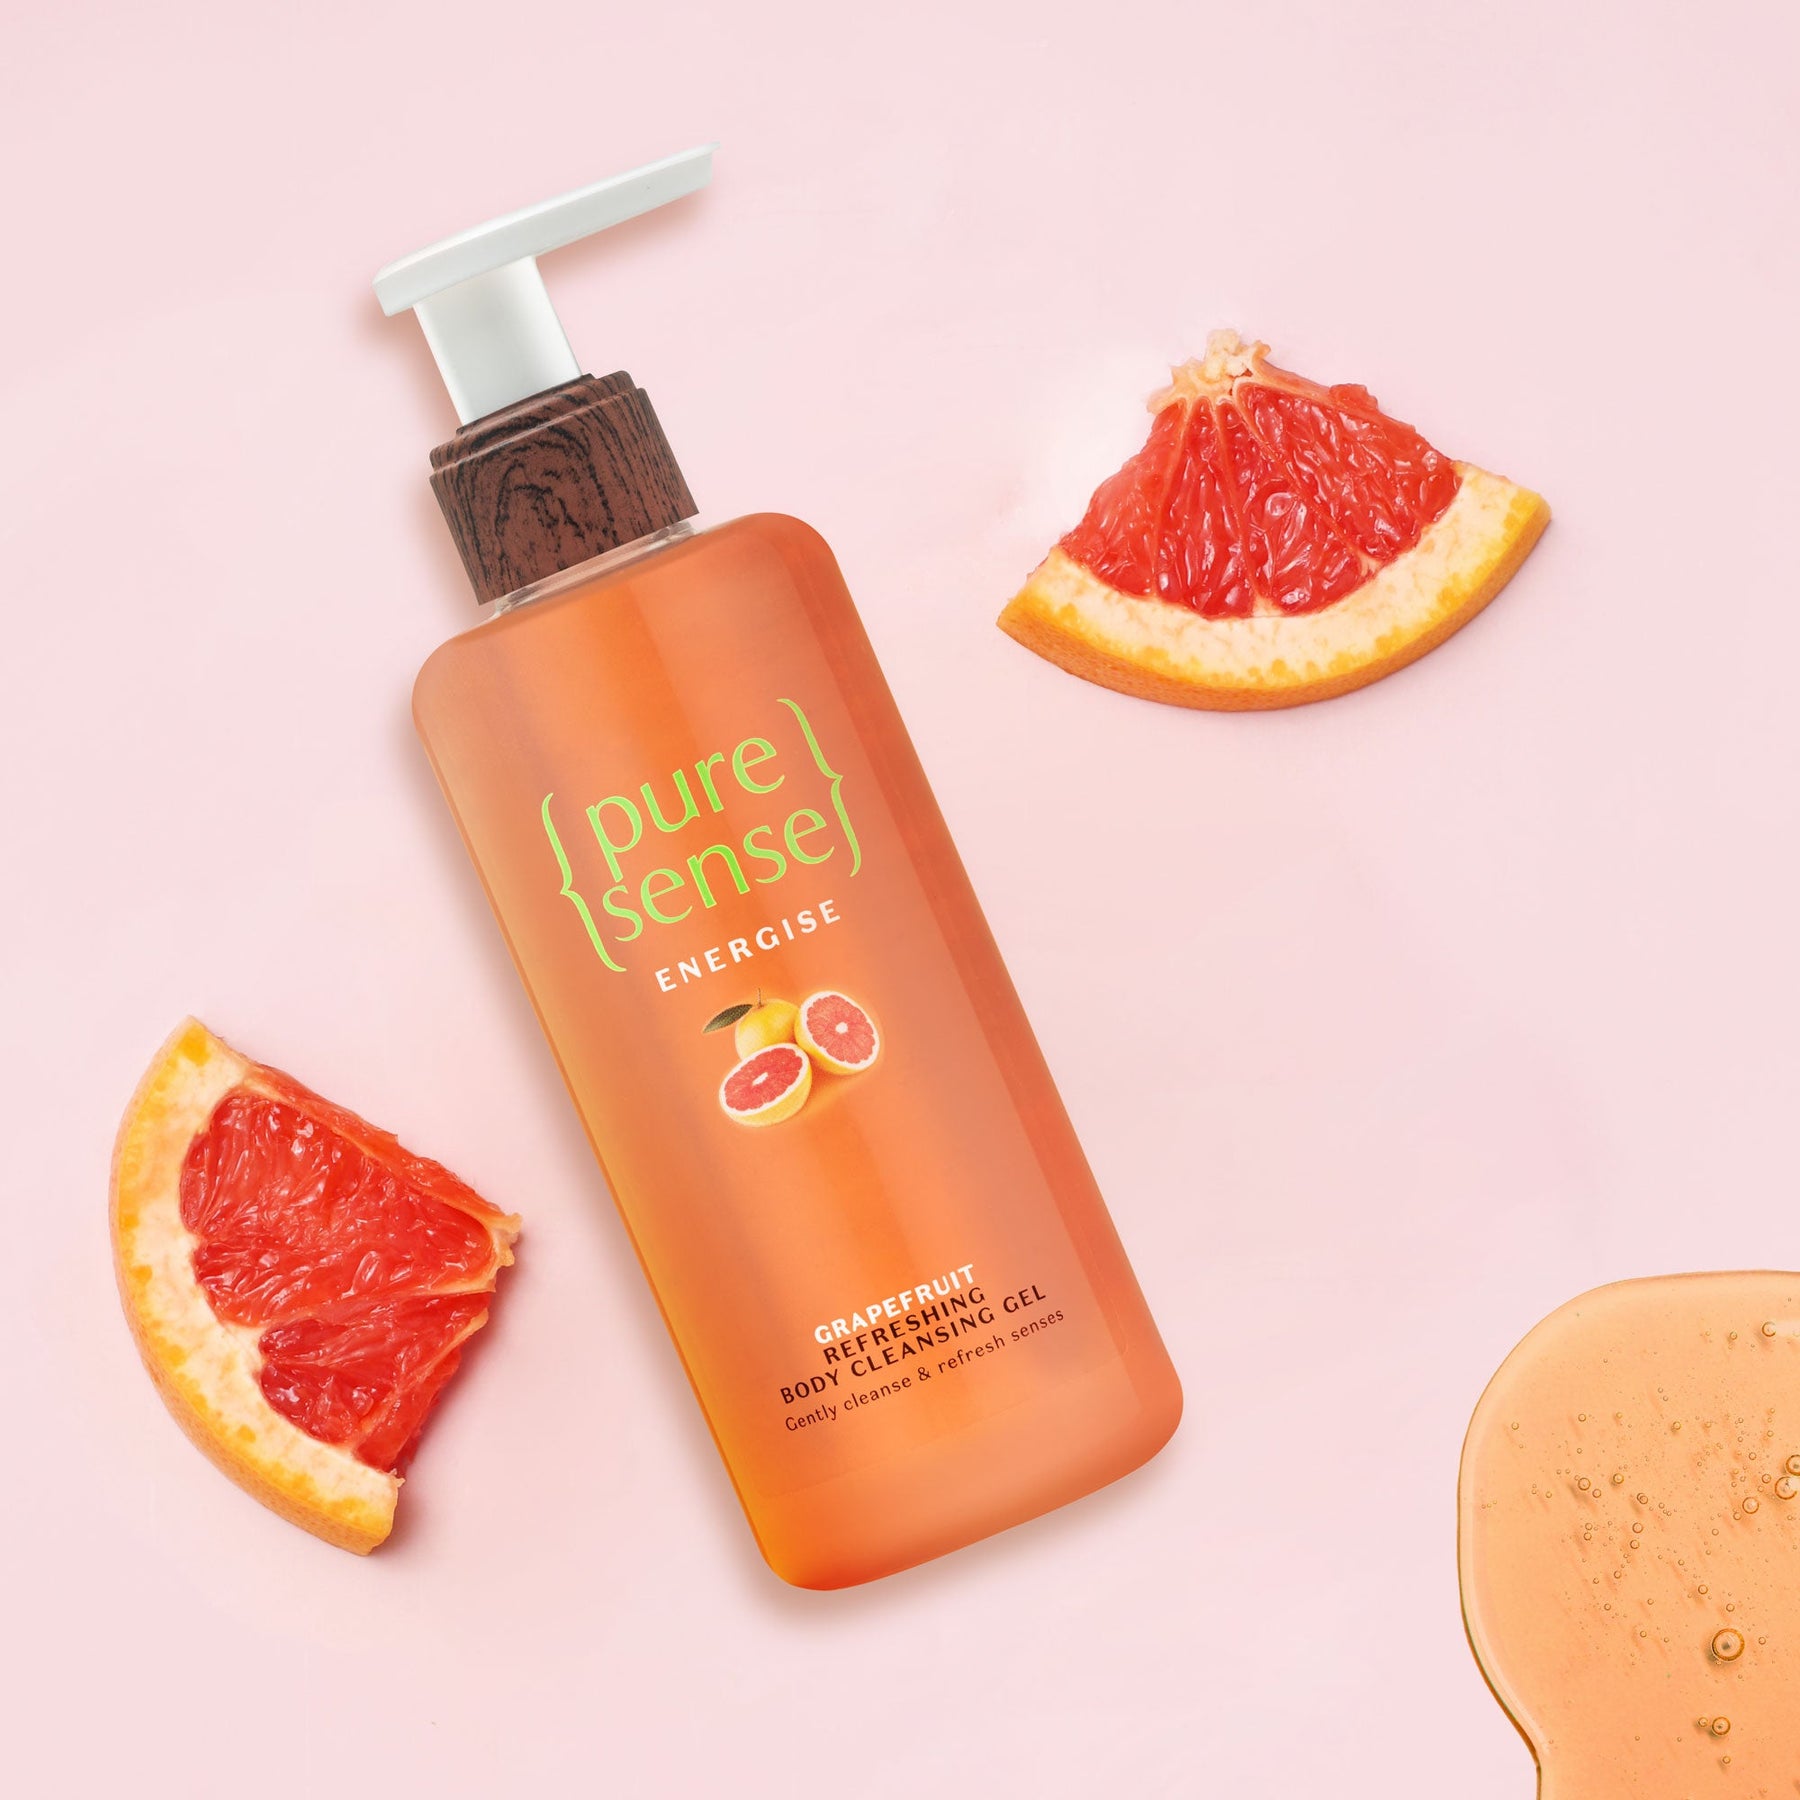 [CRED] Energise Grapefruit Refreshing Body Cleansing Gel | From the makers of Parachute Advansed | 200ml